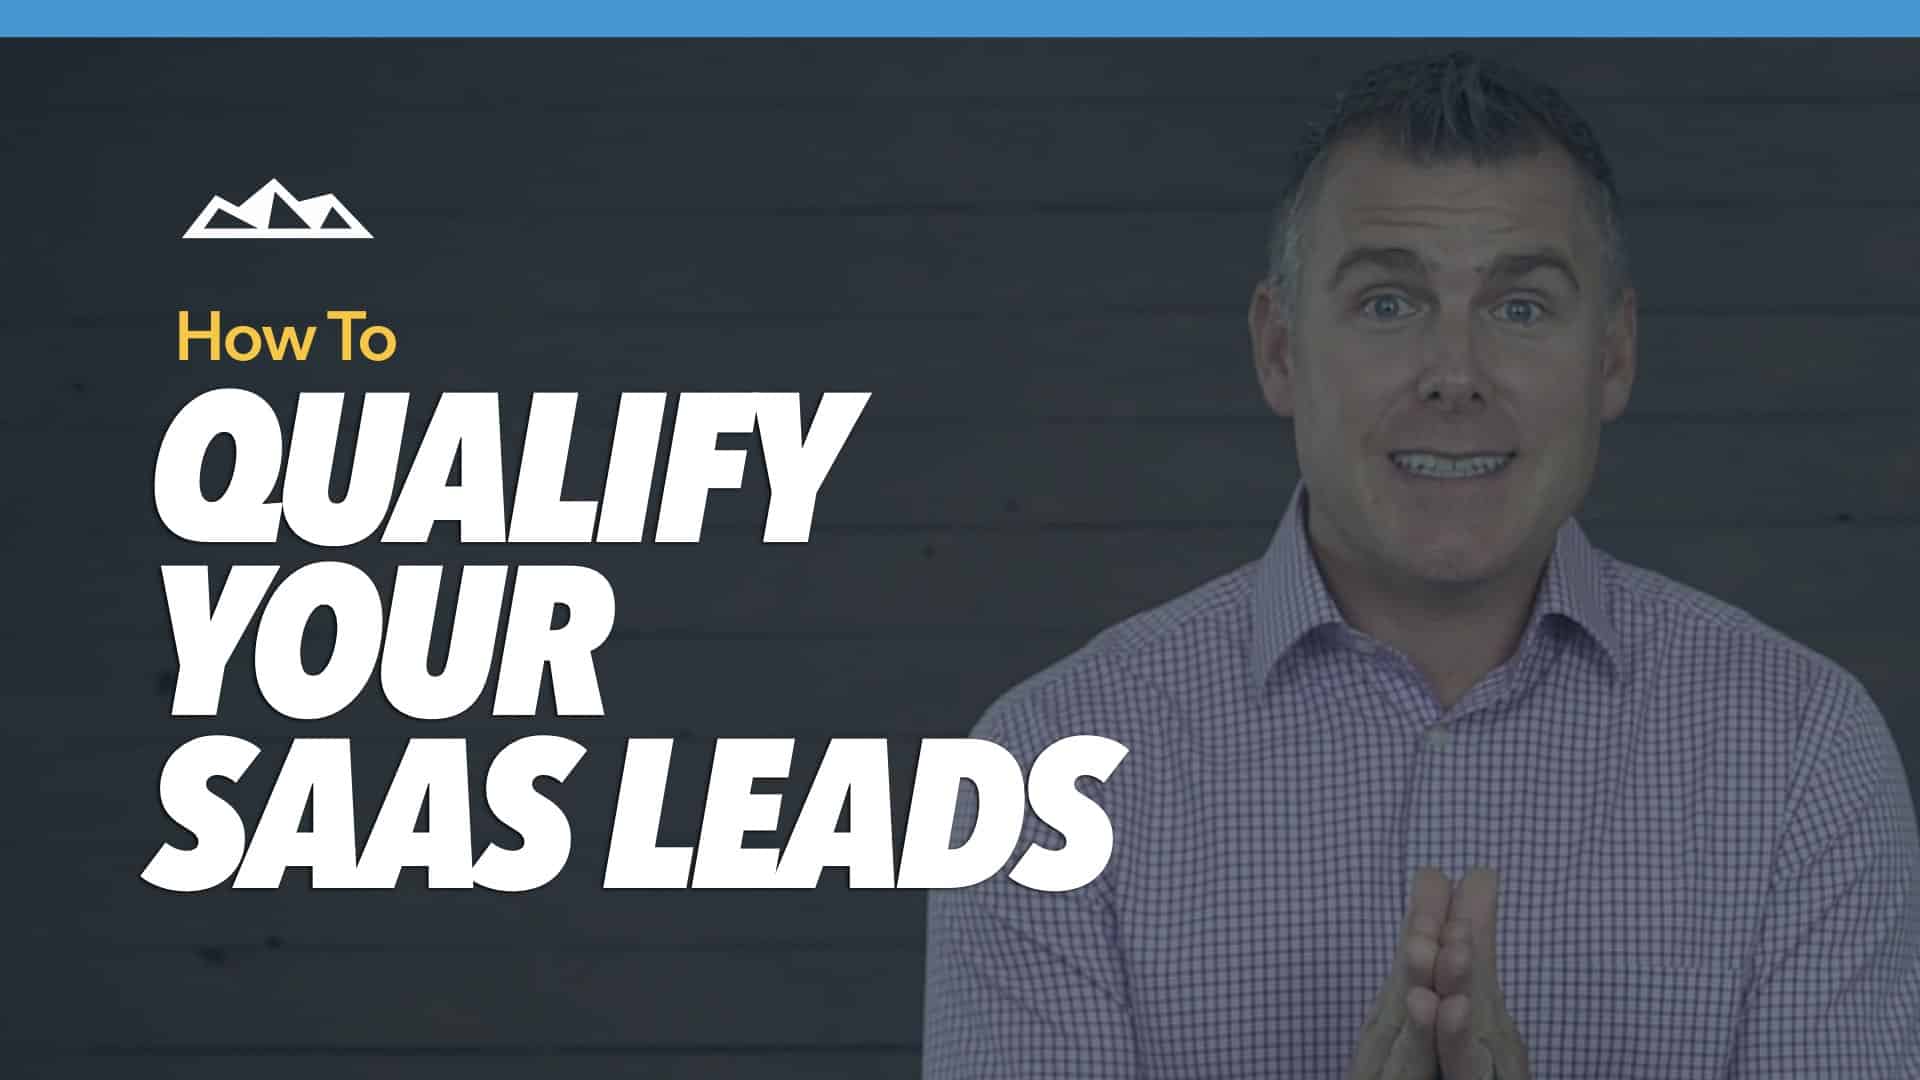 6 Filters to Qualify Your Leads And Never Waste Time With Non-Buyers Again